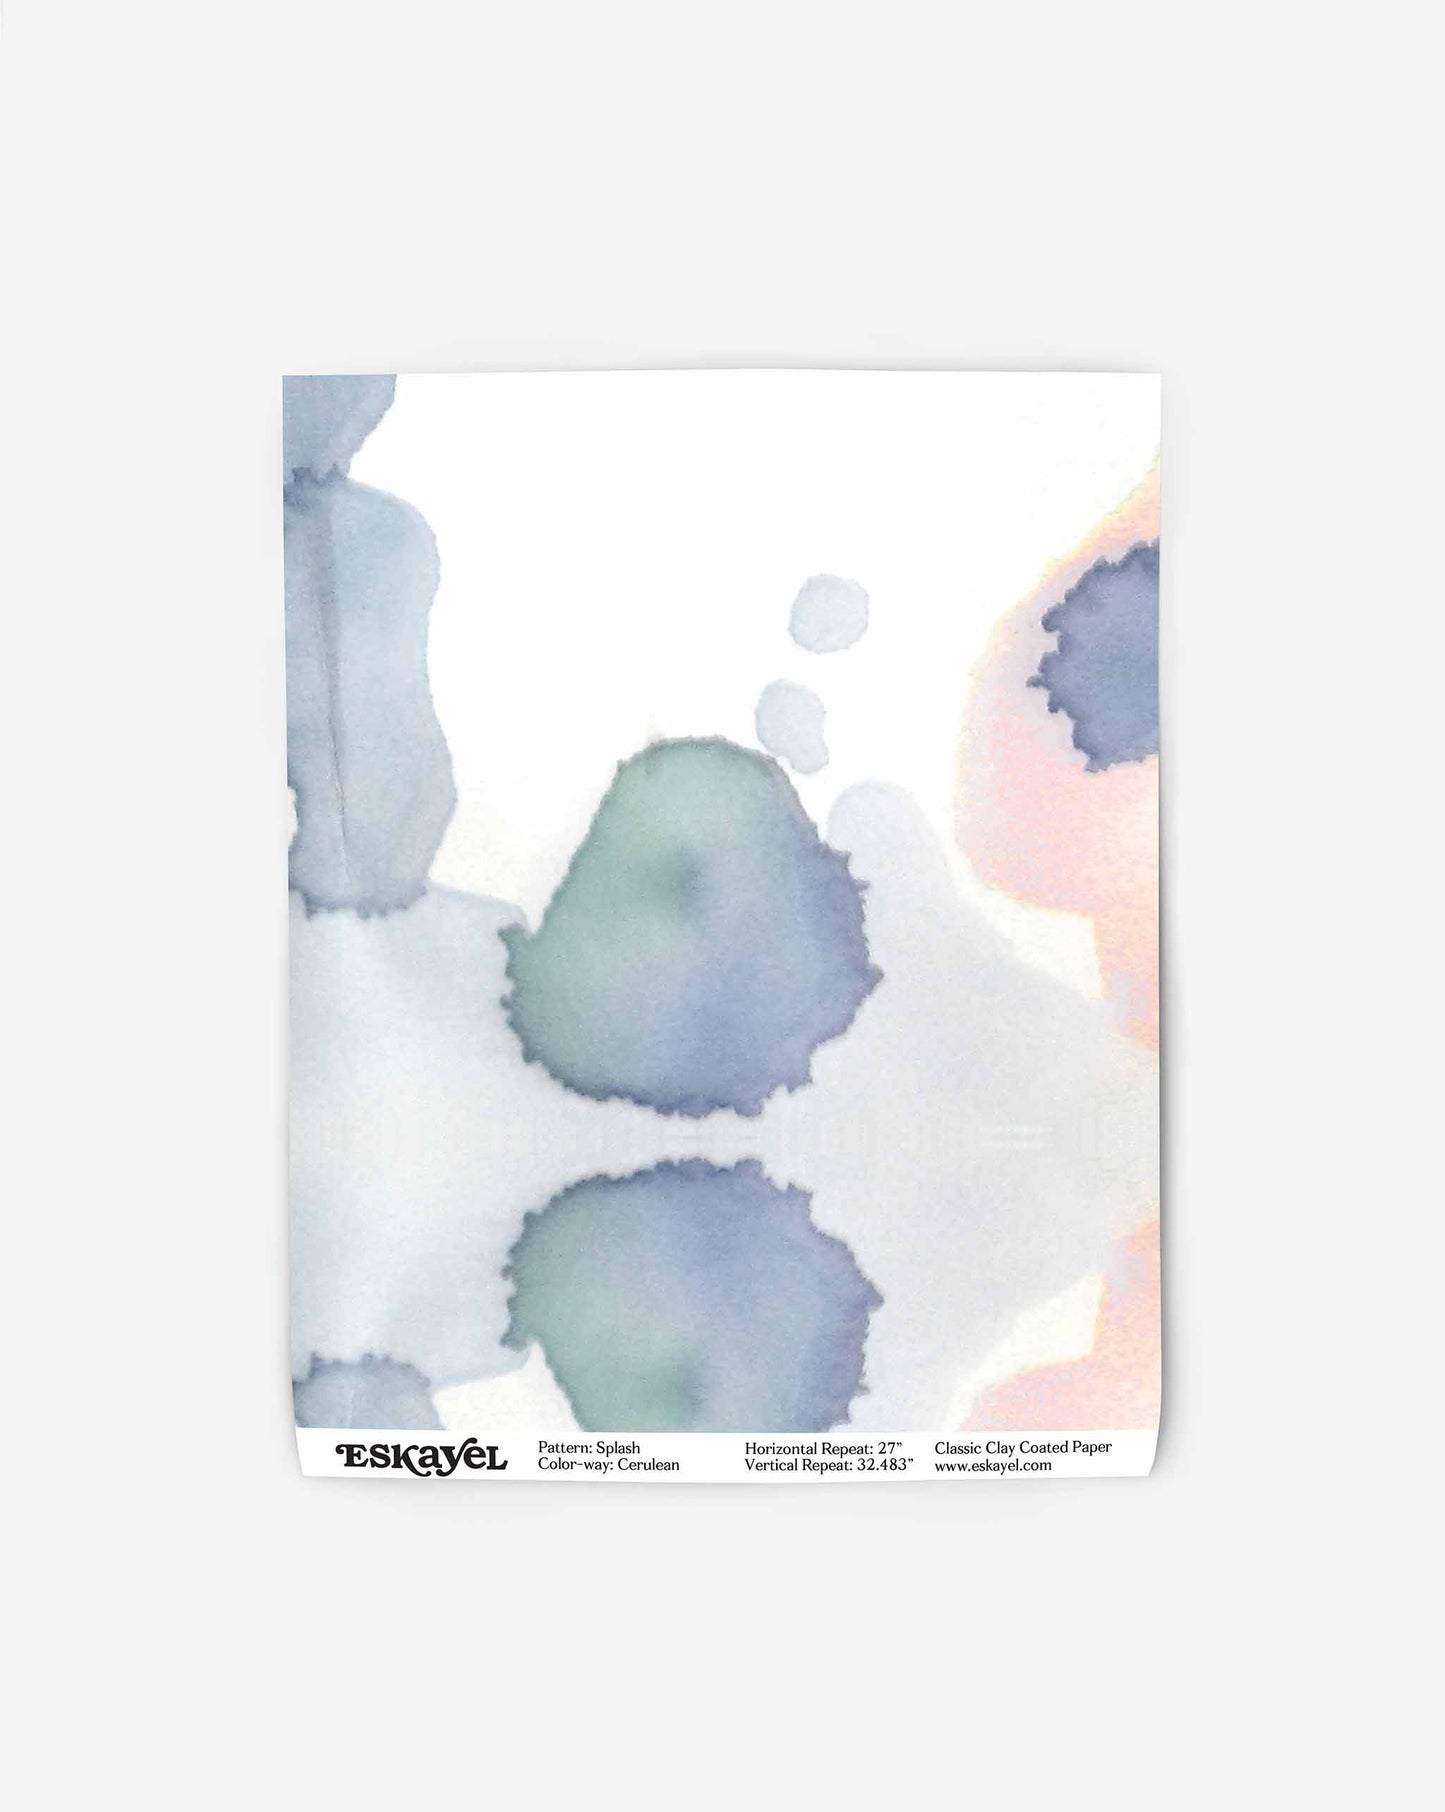 Abstract watercolor design on a piece of Splash Wallpaper||Cerulean with blue, green, and gray splotches, overlaid text at the bottom indicating specifications and branding.